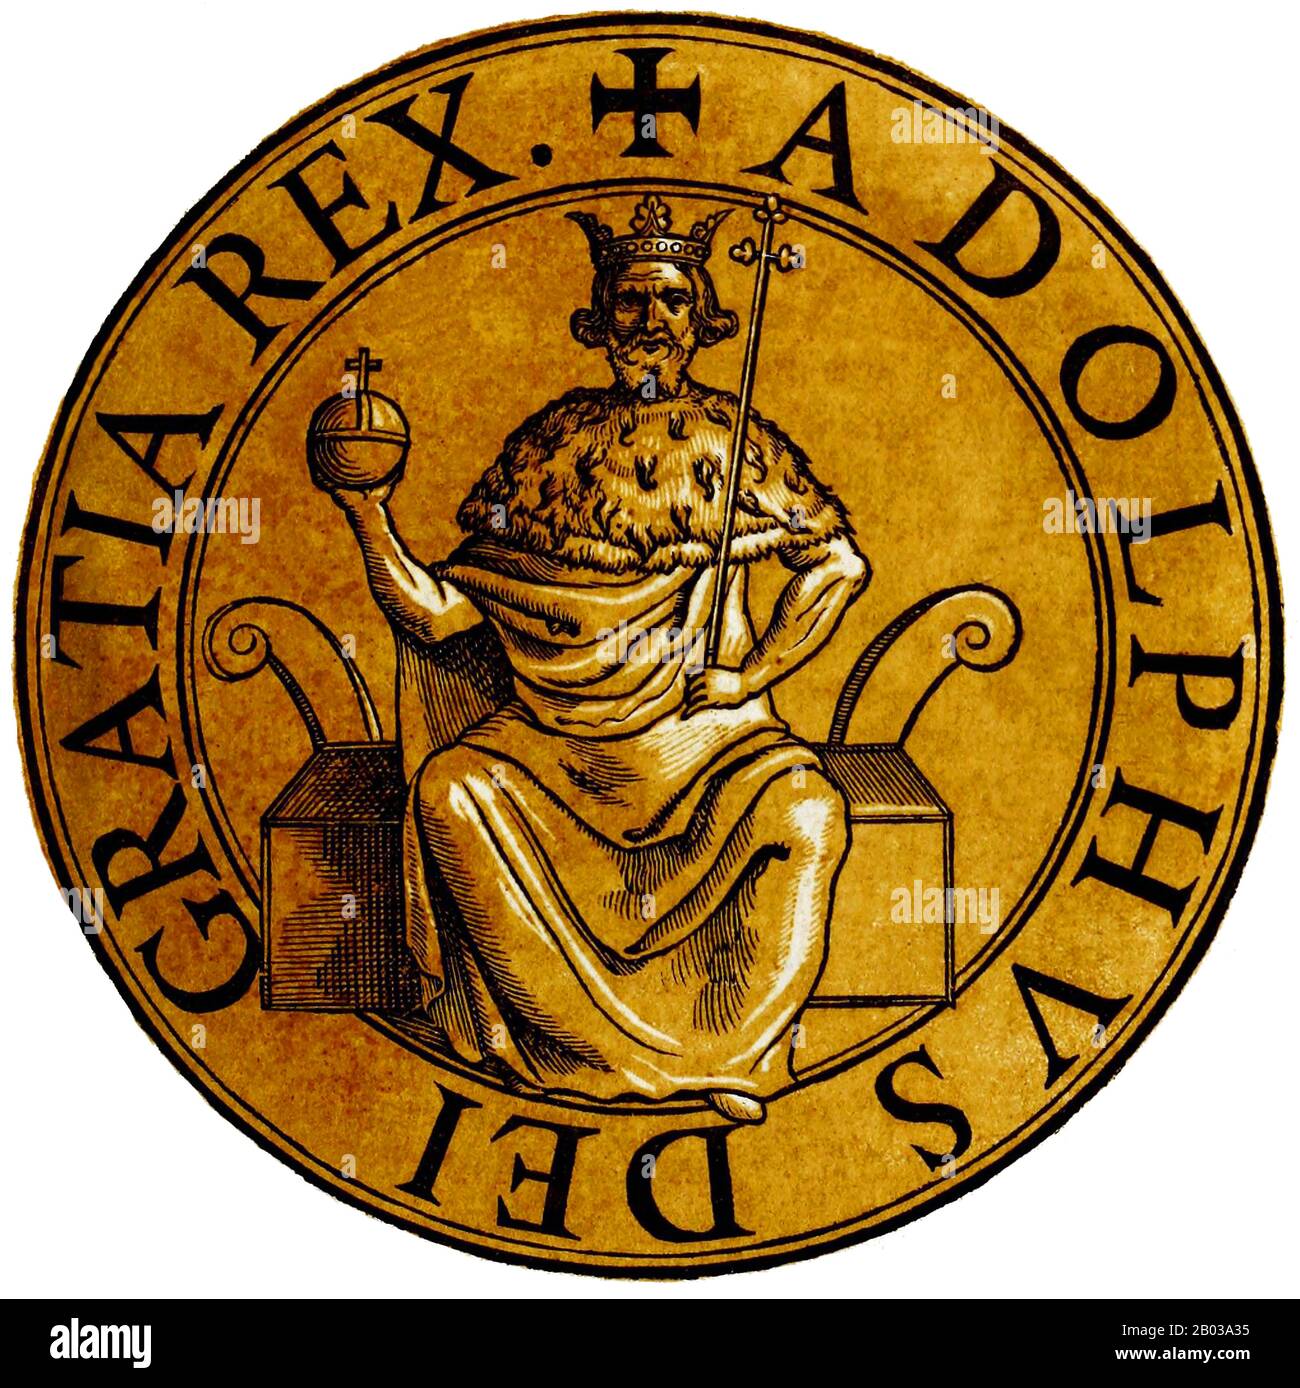 Adolf of Germany (1255-1298), also known as Adolf of Nassau, was the son of Walram II, Count of Nassau, and succeeded his father in 1276. When King Rudolf I died in 1291 without managing to secure the election of his eldest son Albert, Adolf was chosen by the Elector College of imperial princes and bishops, thinking him easy to control and manipulate. He was elected as King of Germany in 1292.  Adolf immediately had to pay and make significant concessions to the electors and archbishops who had given him the crown. Adolf had negligible power and influence within his own empire, but he soon tri Stock Photo